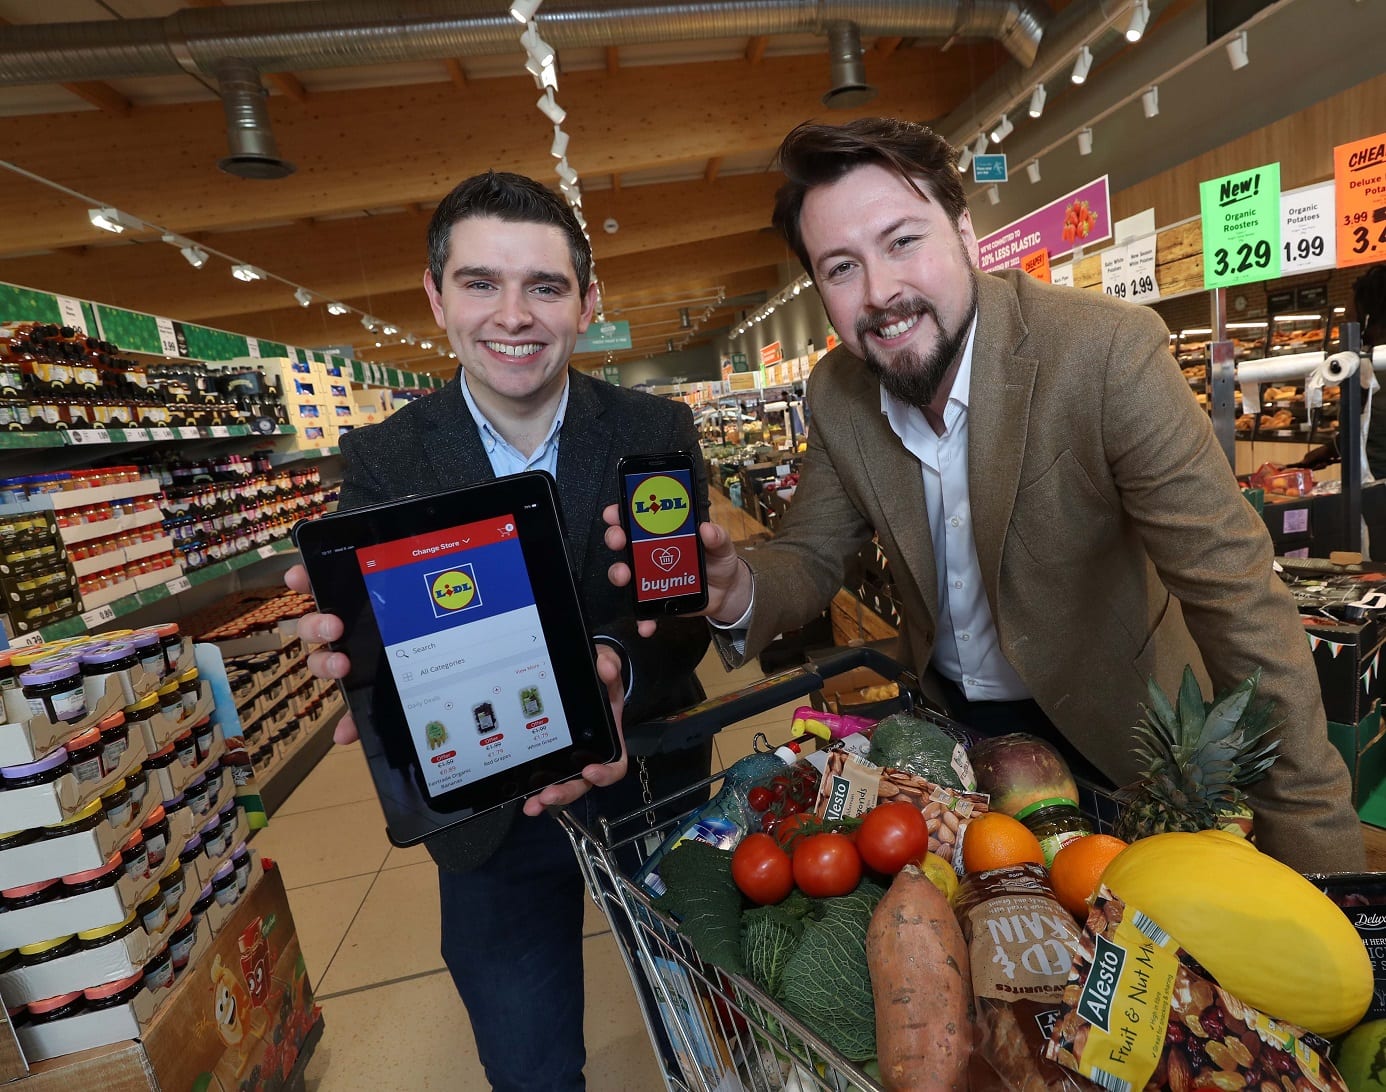 Alan Stewart, head of eCommerce at Lidl marks the new launch with Devan Hughes, CEO & co-founder of Buymie